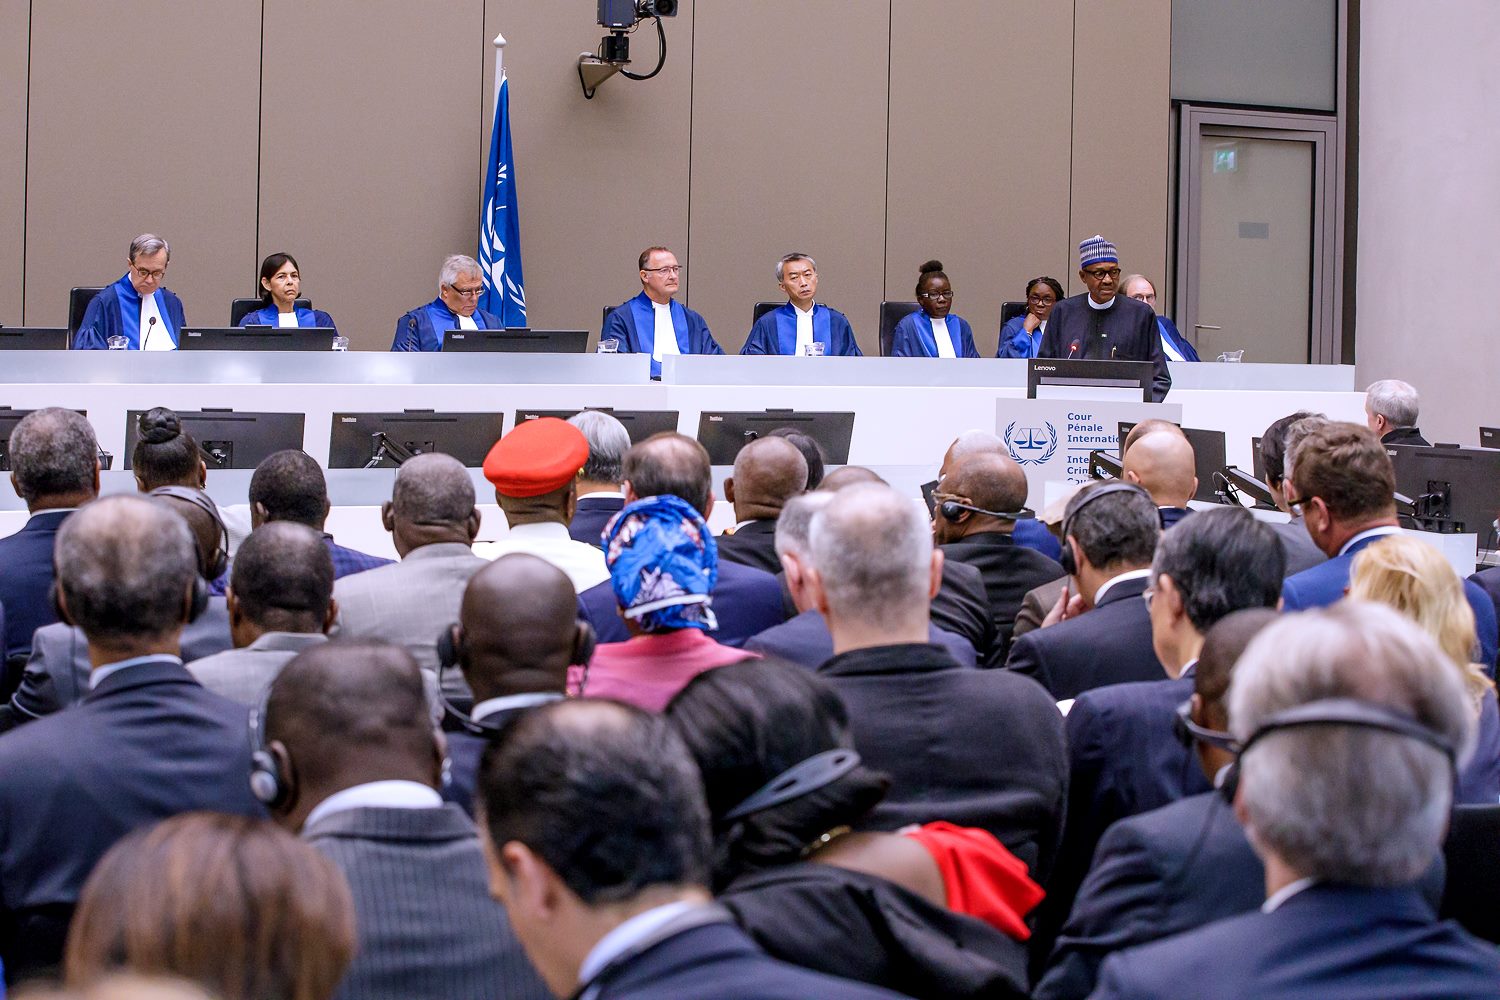 President Buhari presents Keynote Address at the 20th Anniversary of the International Criminal Court (ICC) at the Hague, Netherlands on 17th July 2018